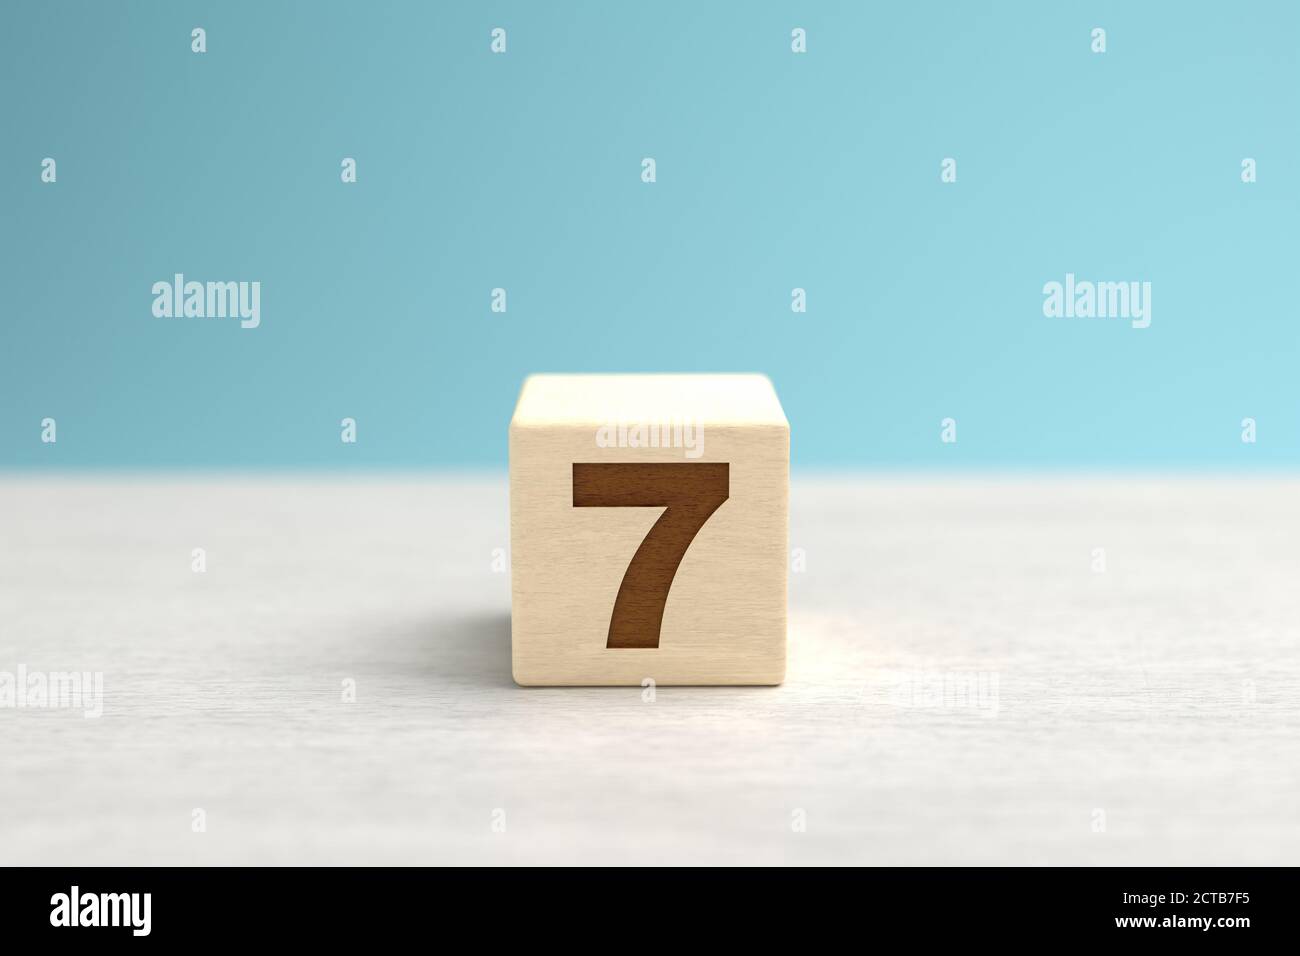 A wooden toy cube with the number 7. Stock Photo